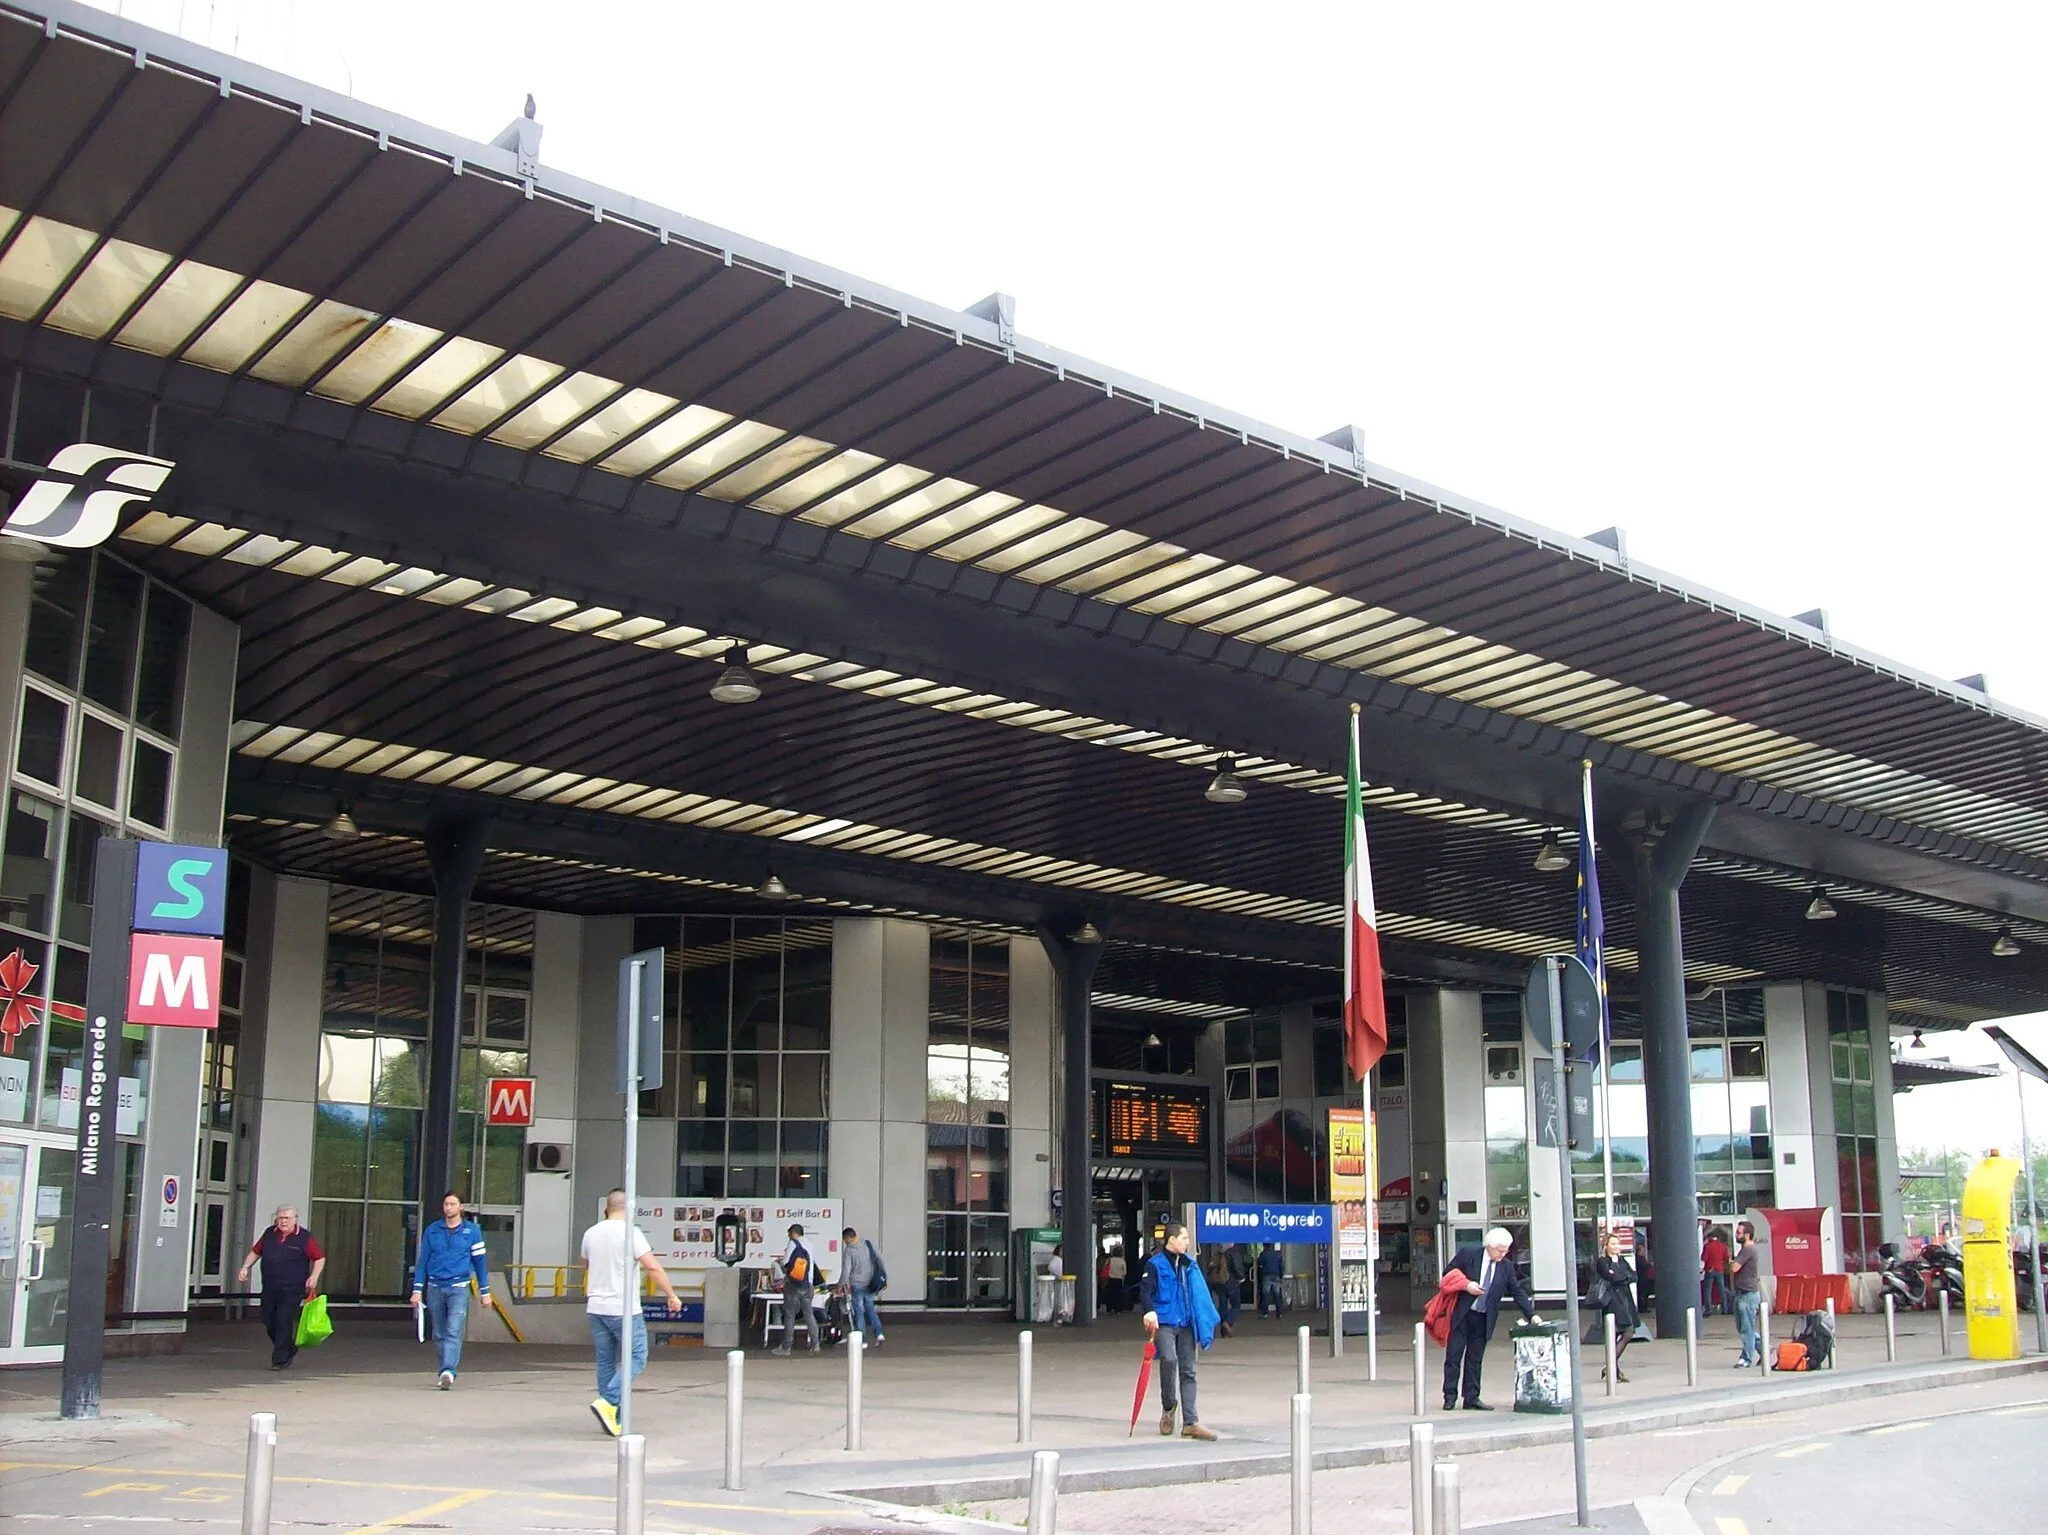 Photo showing: The front of the Milano Rogoredo railway station in Milan, Italy